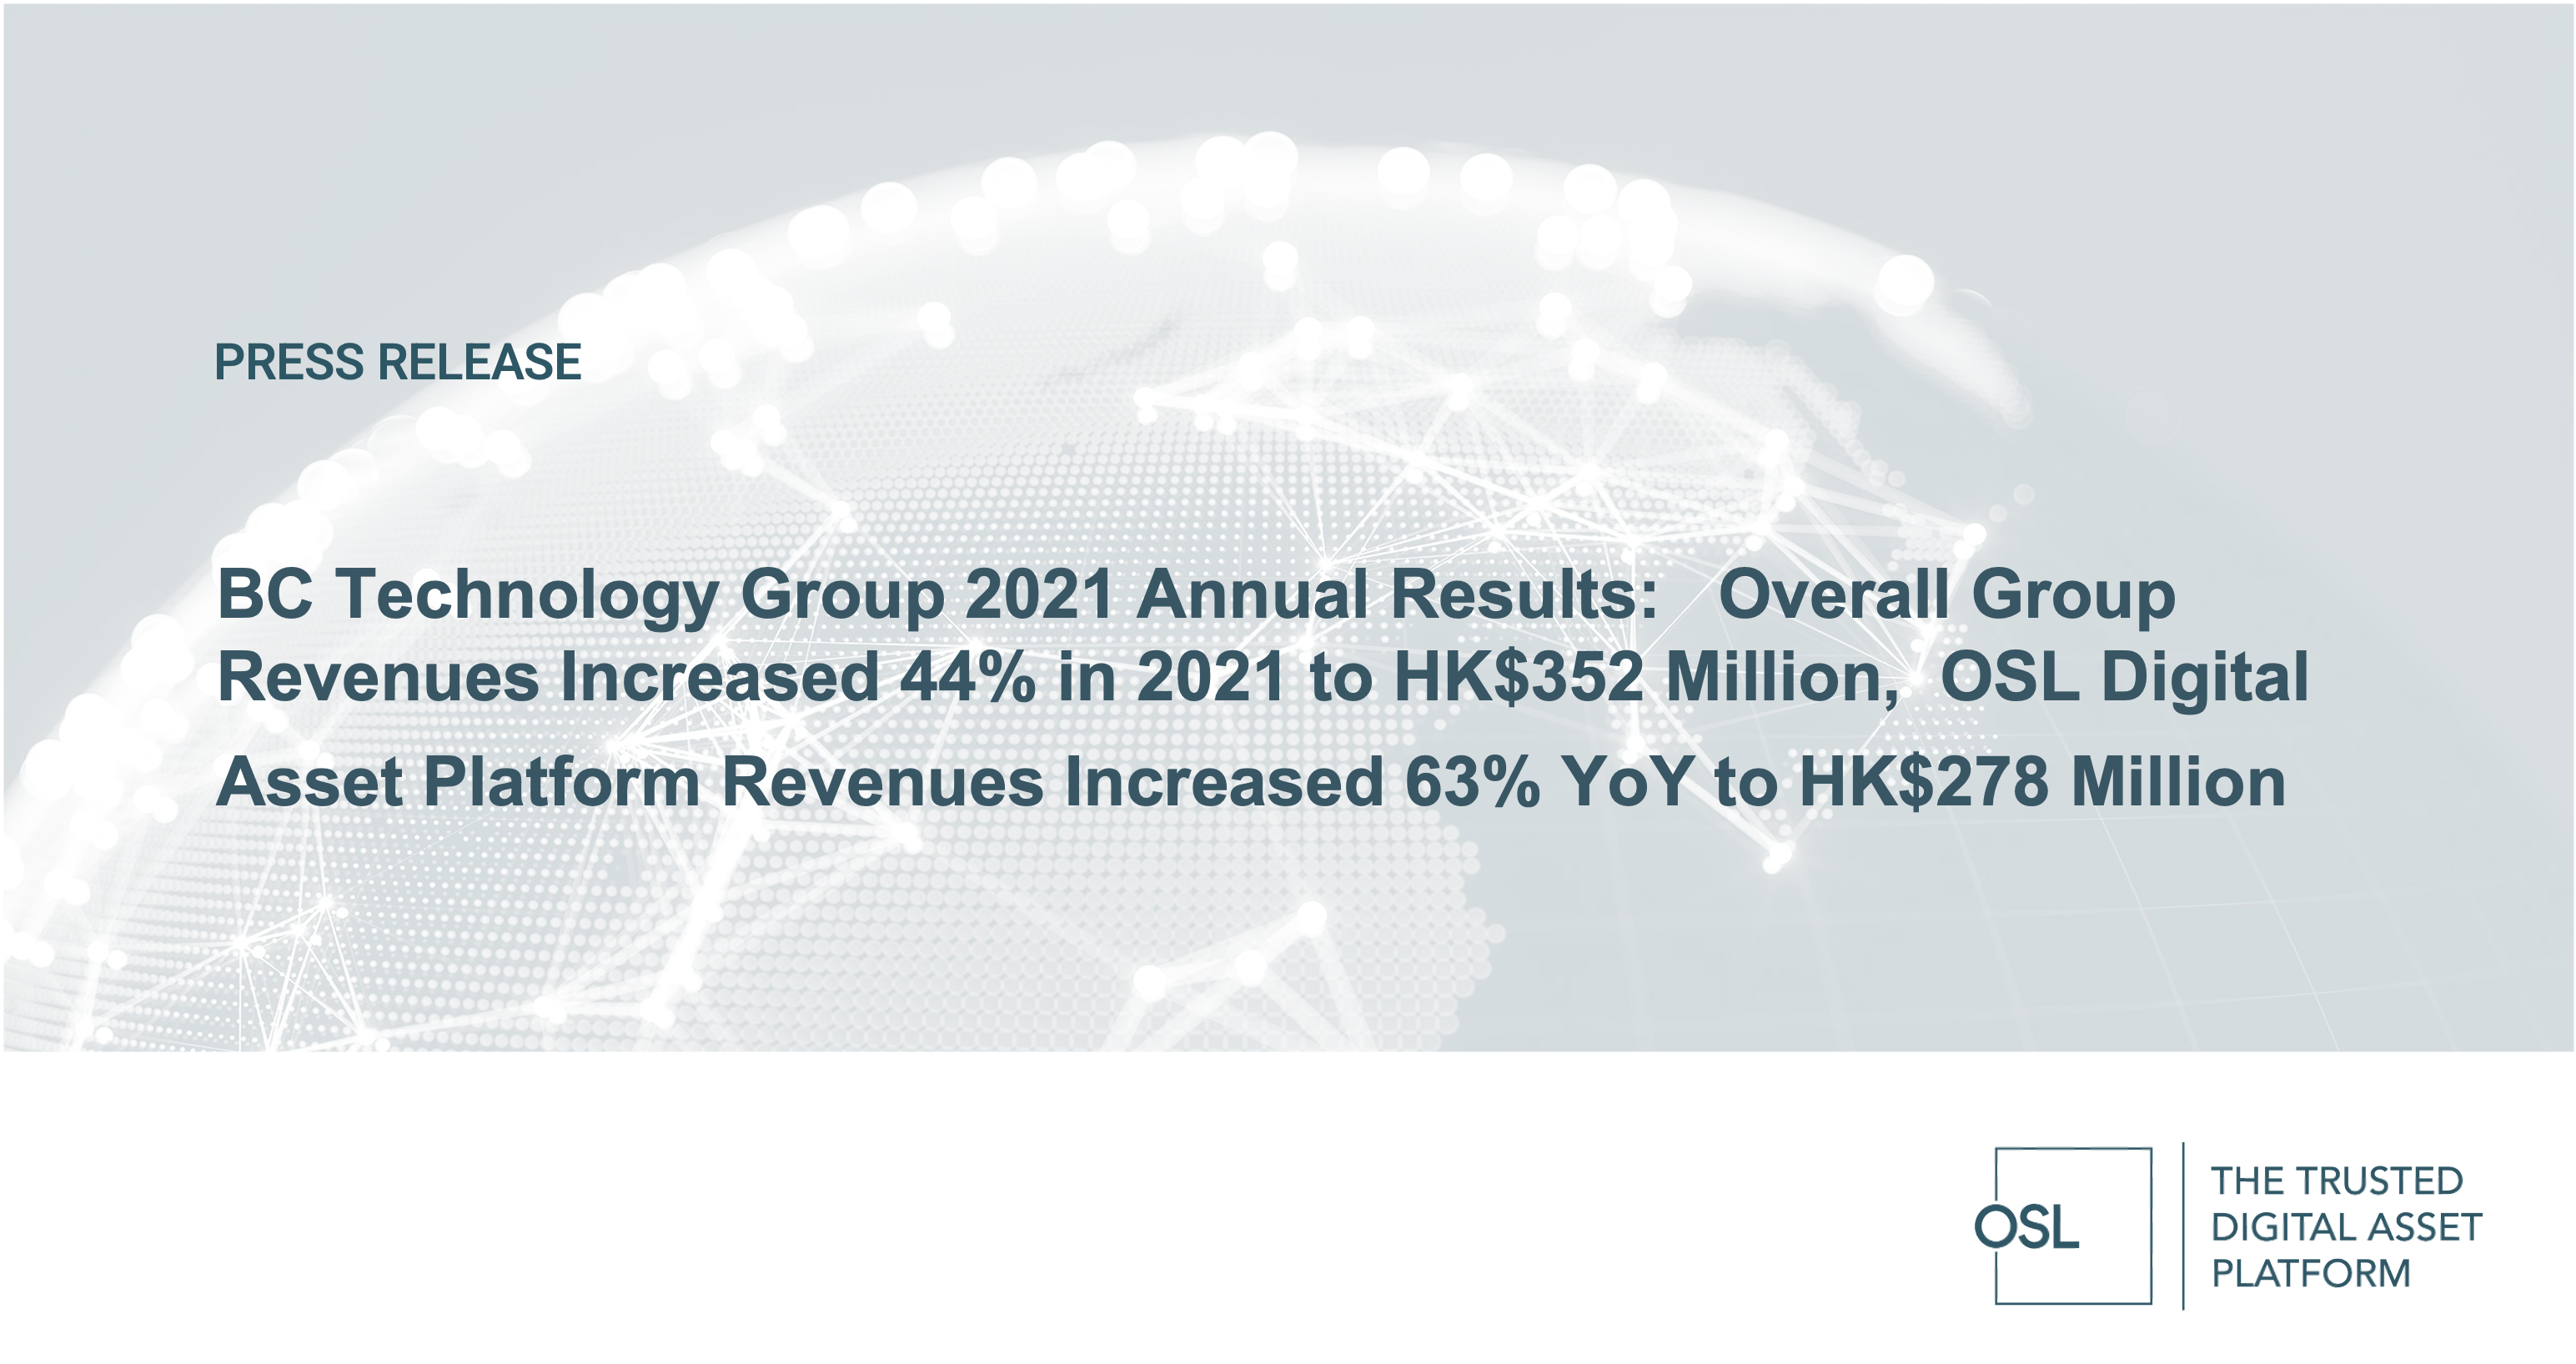 BC Technology Group 2021 Annual Results